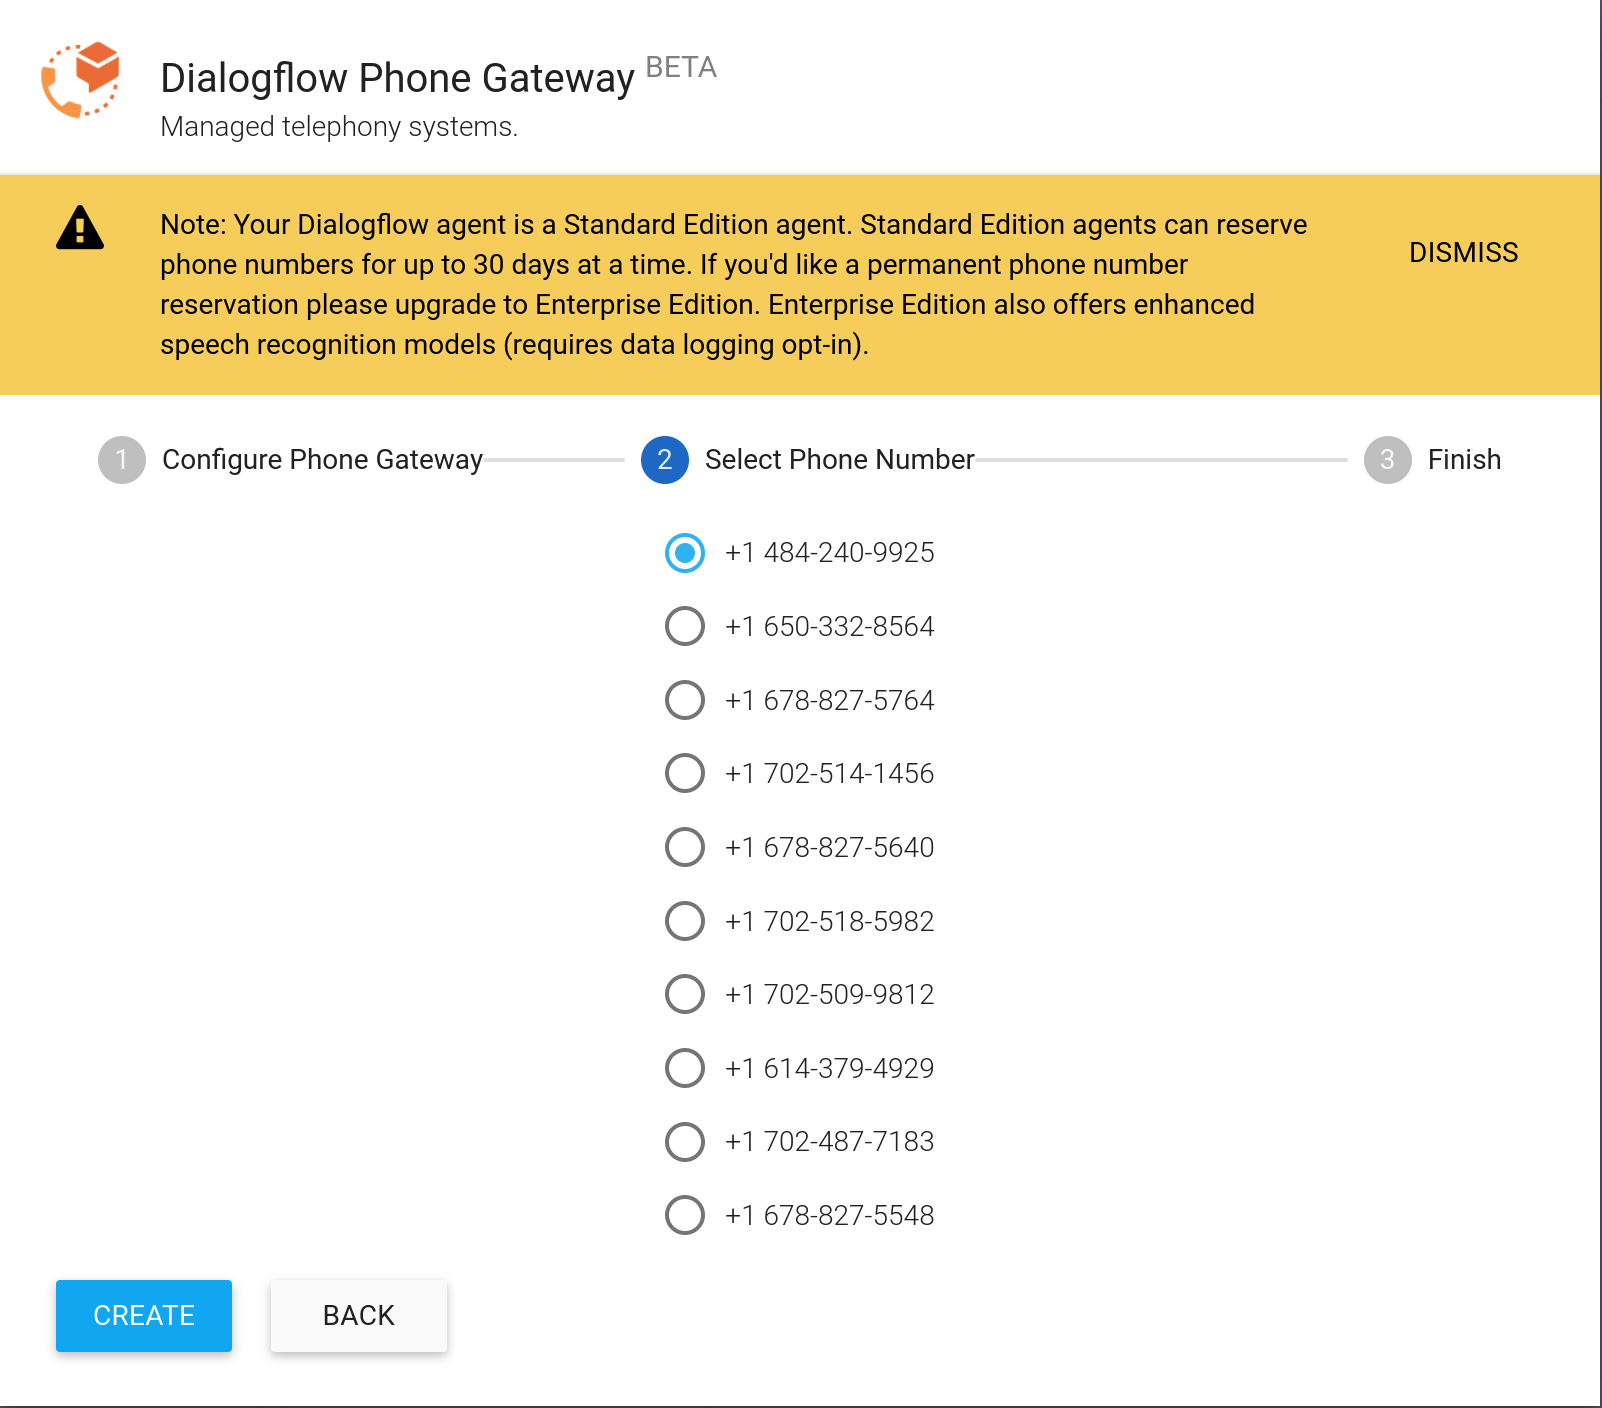 Dialogflow Phone Gateway. Second step: Select Phone Number